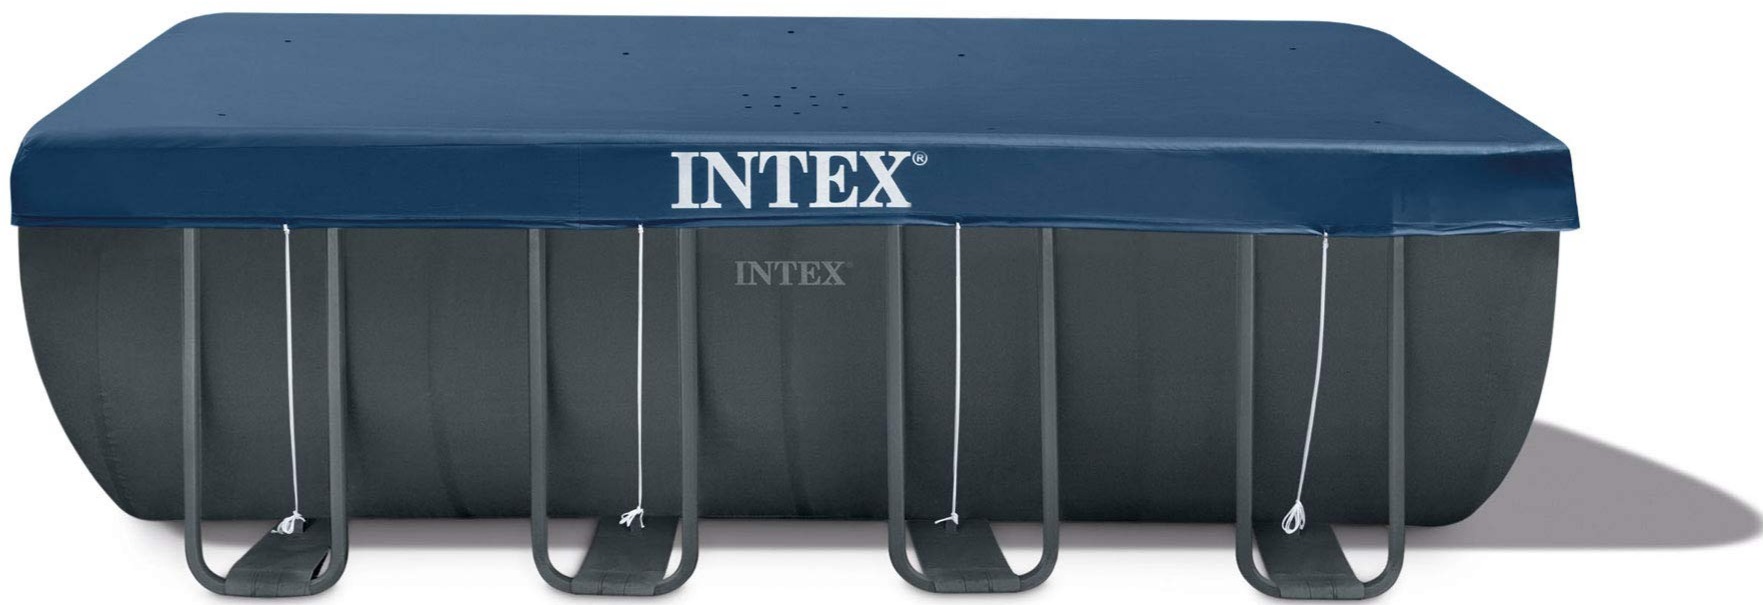 Intex Ultra XTR 18' x 9' x 52" Rectangular Frame Above Ground Outdoor Swimming Pool Set for $807.99 from Amazon